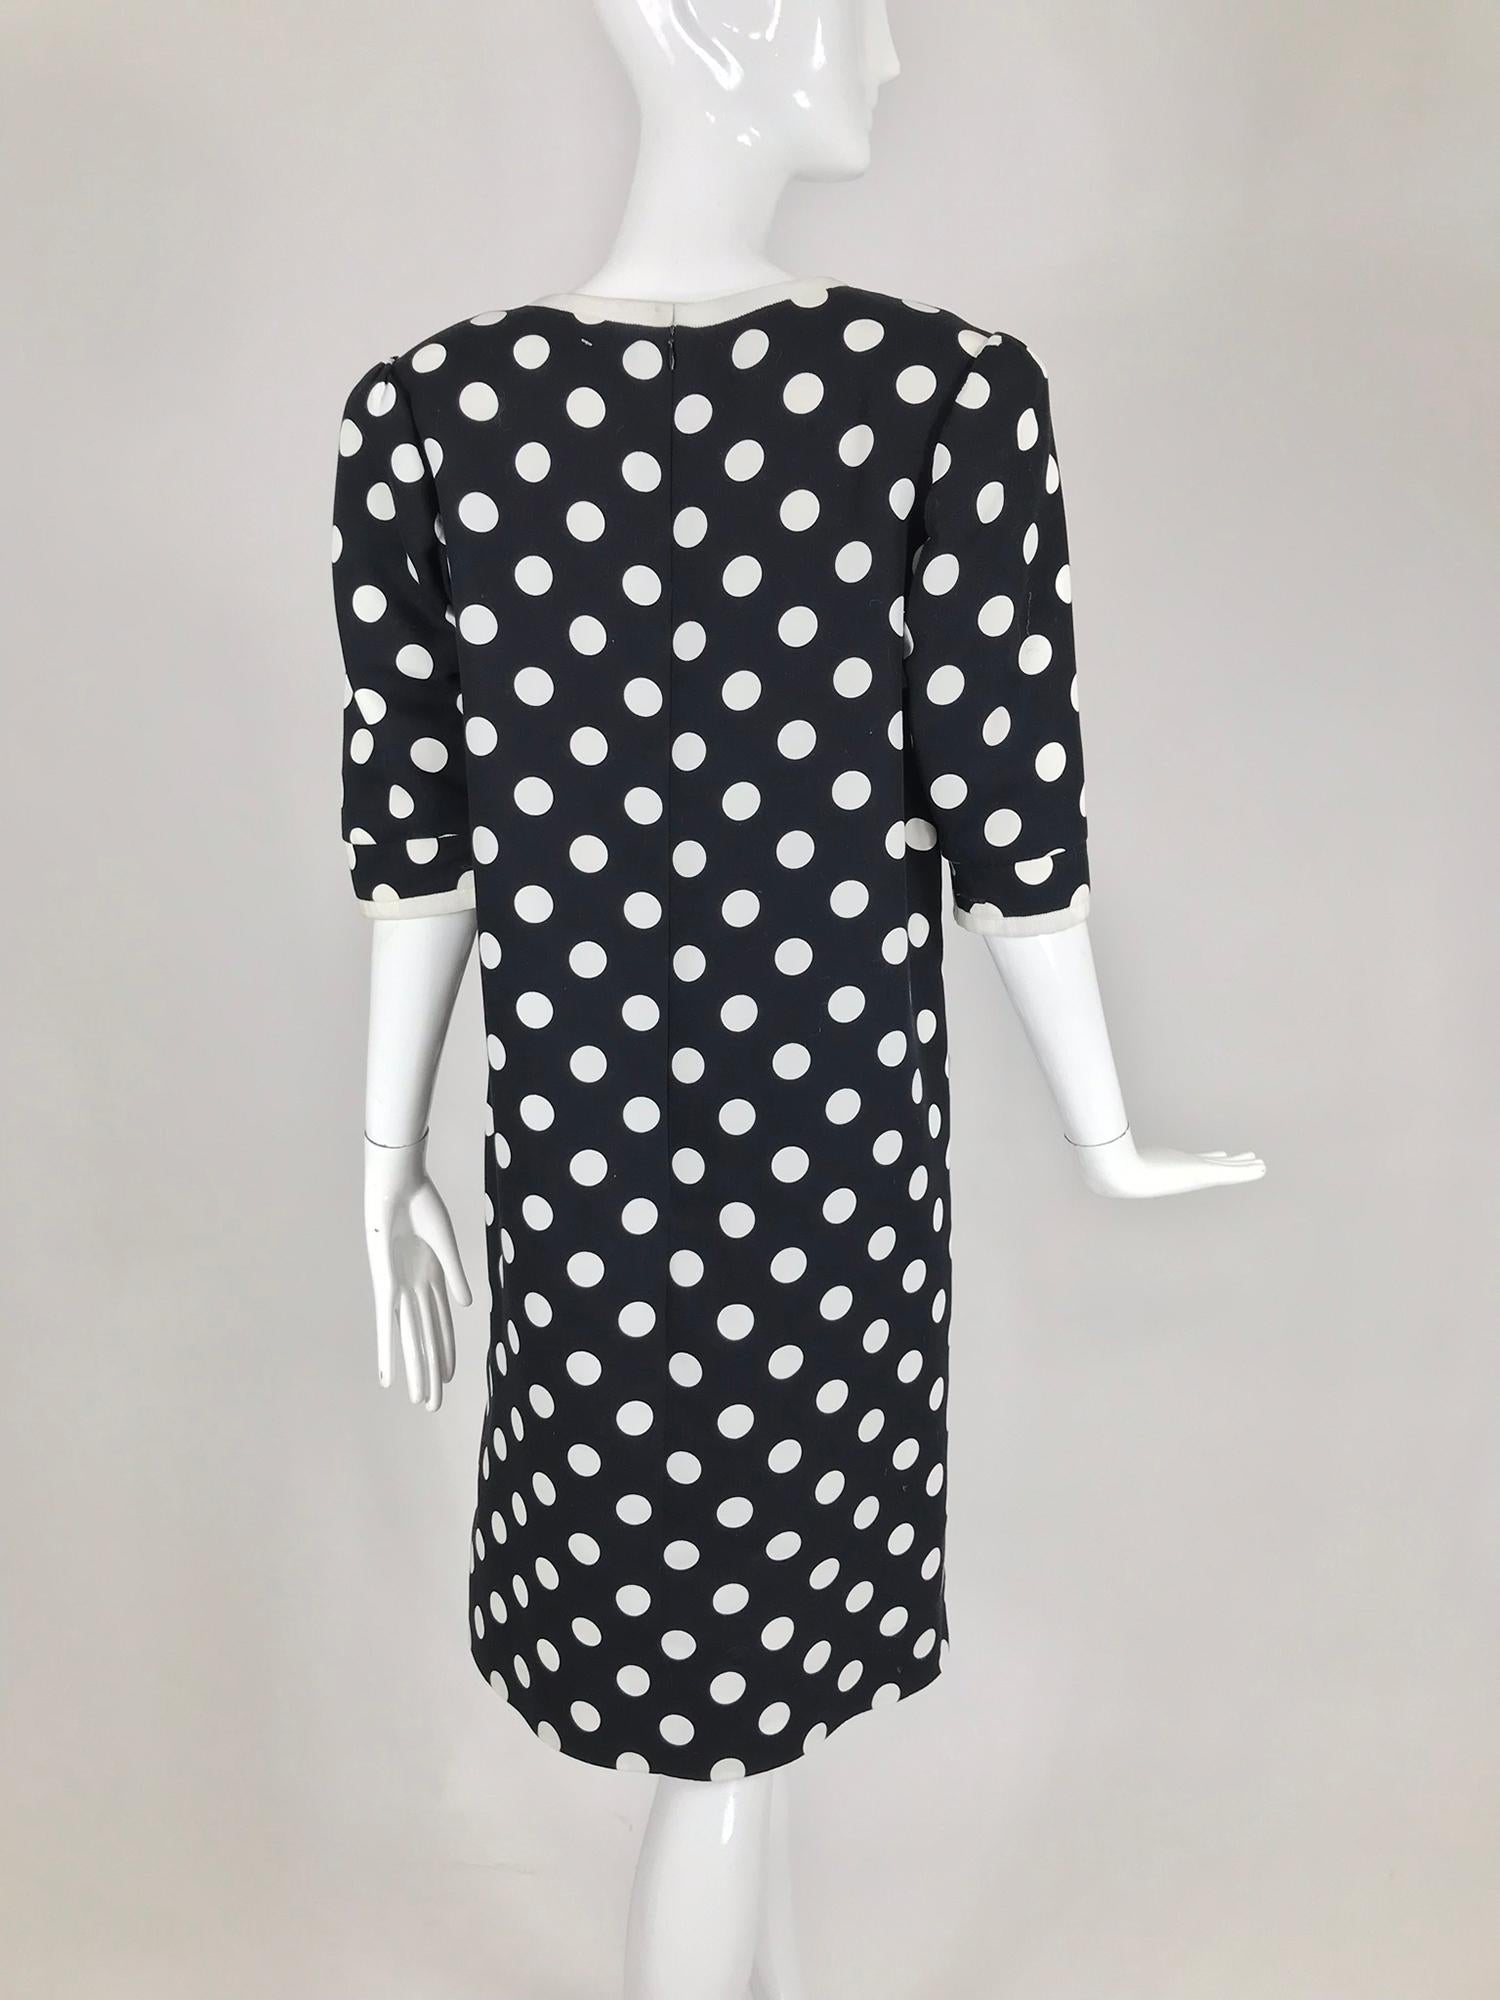 Givenchy Couture Black and White Cotton Polka Dot Day Dress 1980s For Sale 4